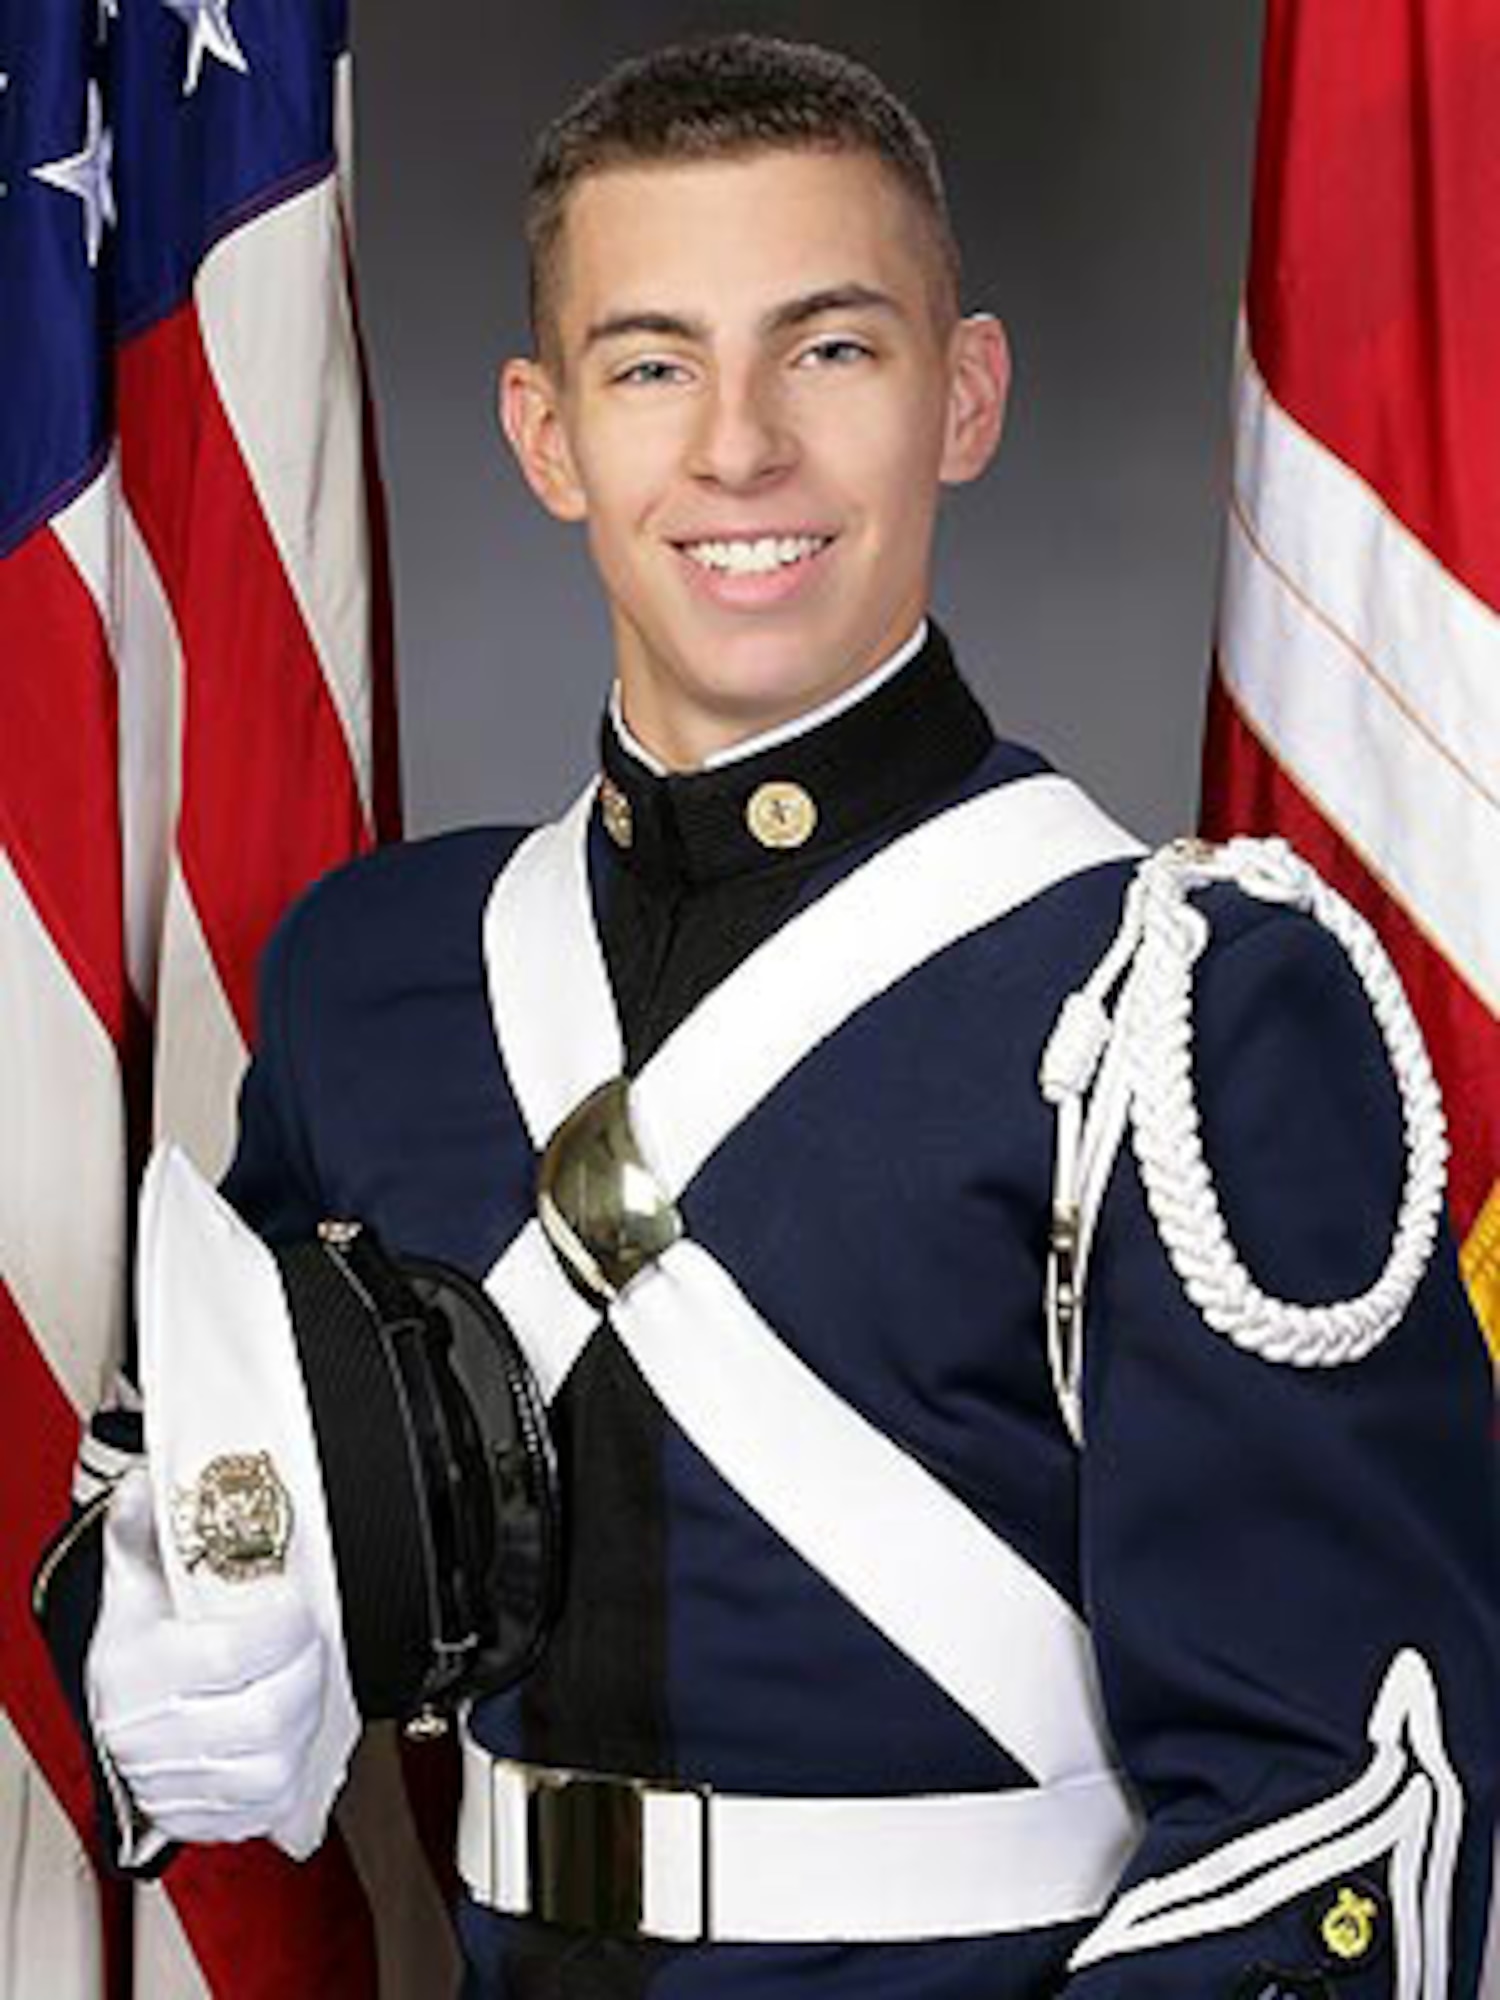 Cadet Matthew La Porte, one of the 32 students and faculty killed during the shooting incident at Virginia Tech April 16, was a sophomore in Air Force ROTC Detachment 875 and the Virginia Tech Corps of Cadets. (Courtesy photo)